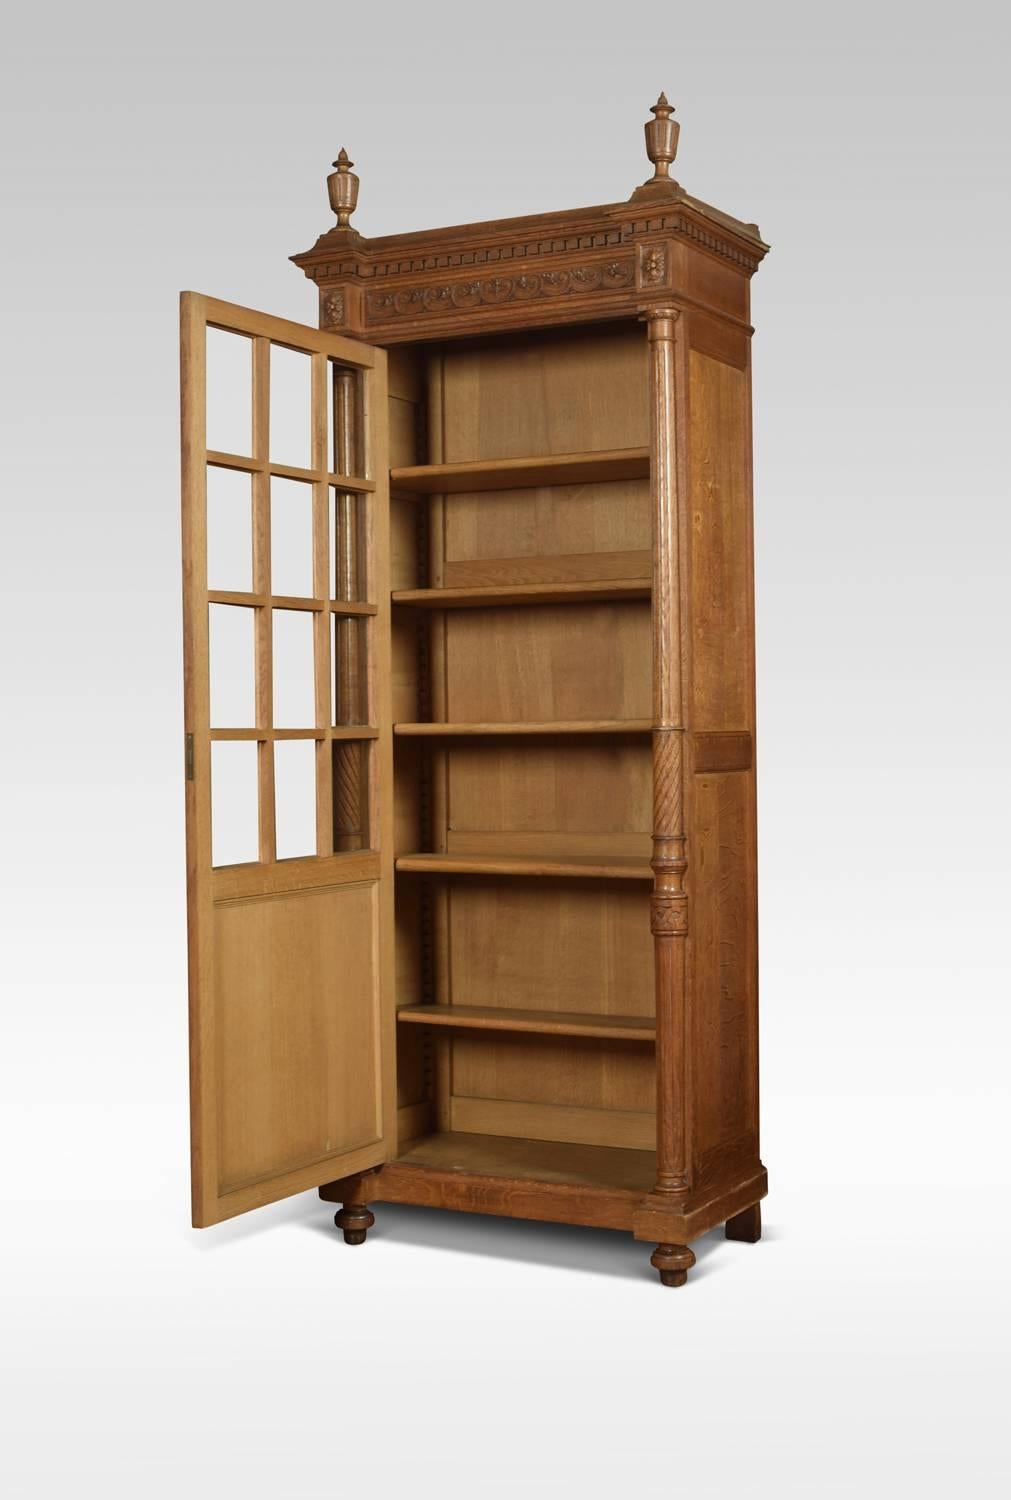 Great Britain (UK) Pair of Tall Oak Bookcases